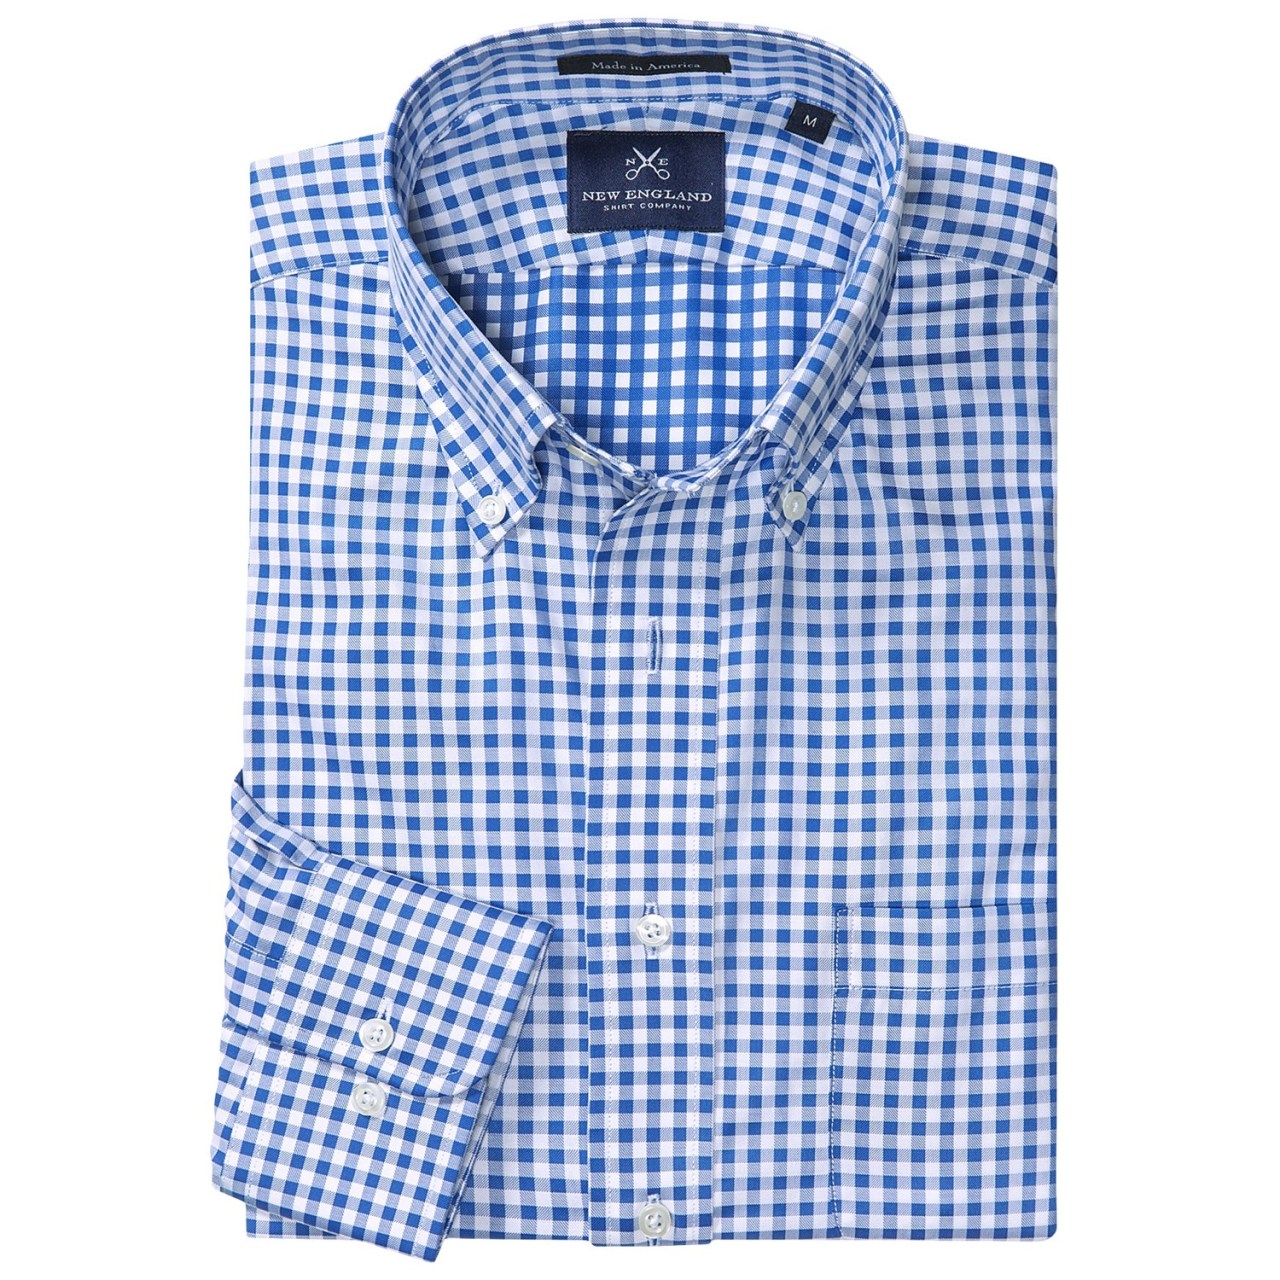 On Sale at STP: 58% Off USA-Made Shirts from New... | This Fits ...